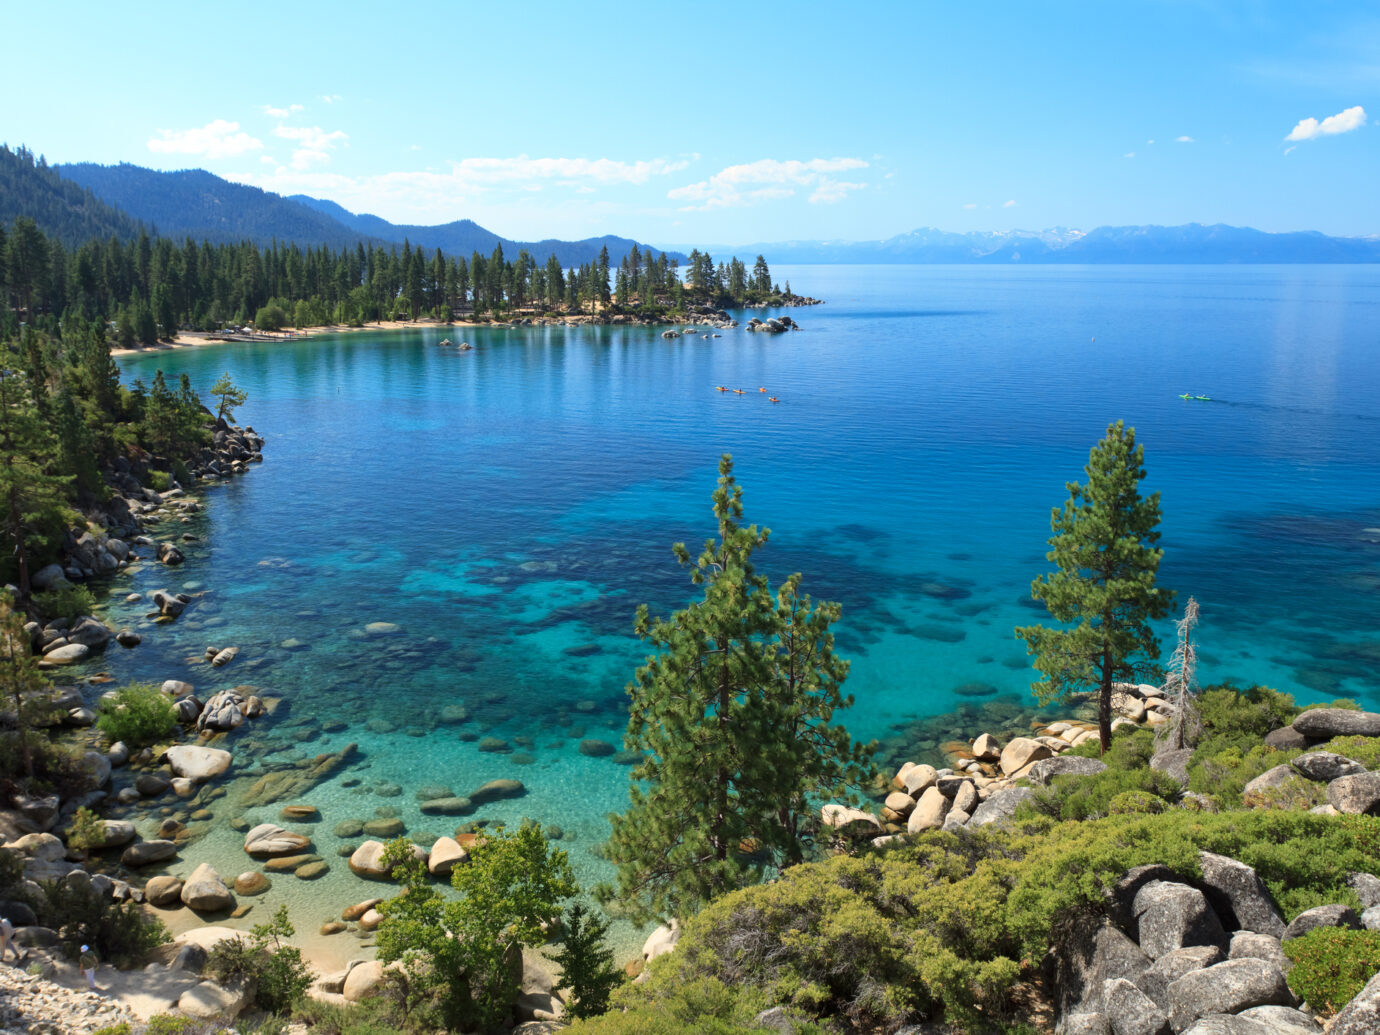 Picture of Lake Tahoe seeing from view point near Sand Harbor. This is east shore line with many rocks and pine trees photographed in the morning during summer.